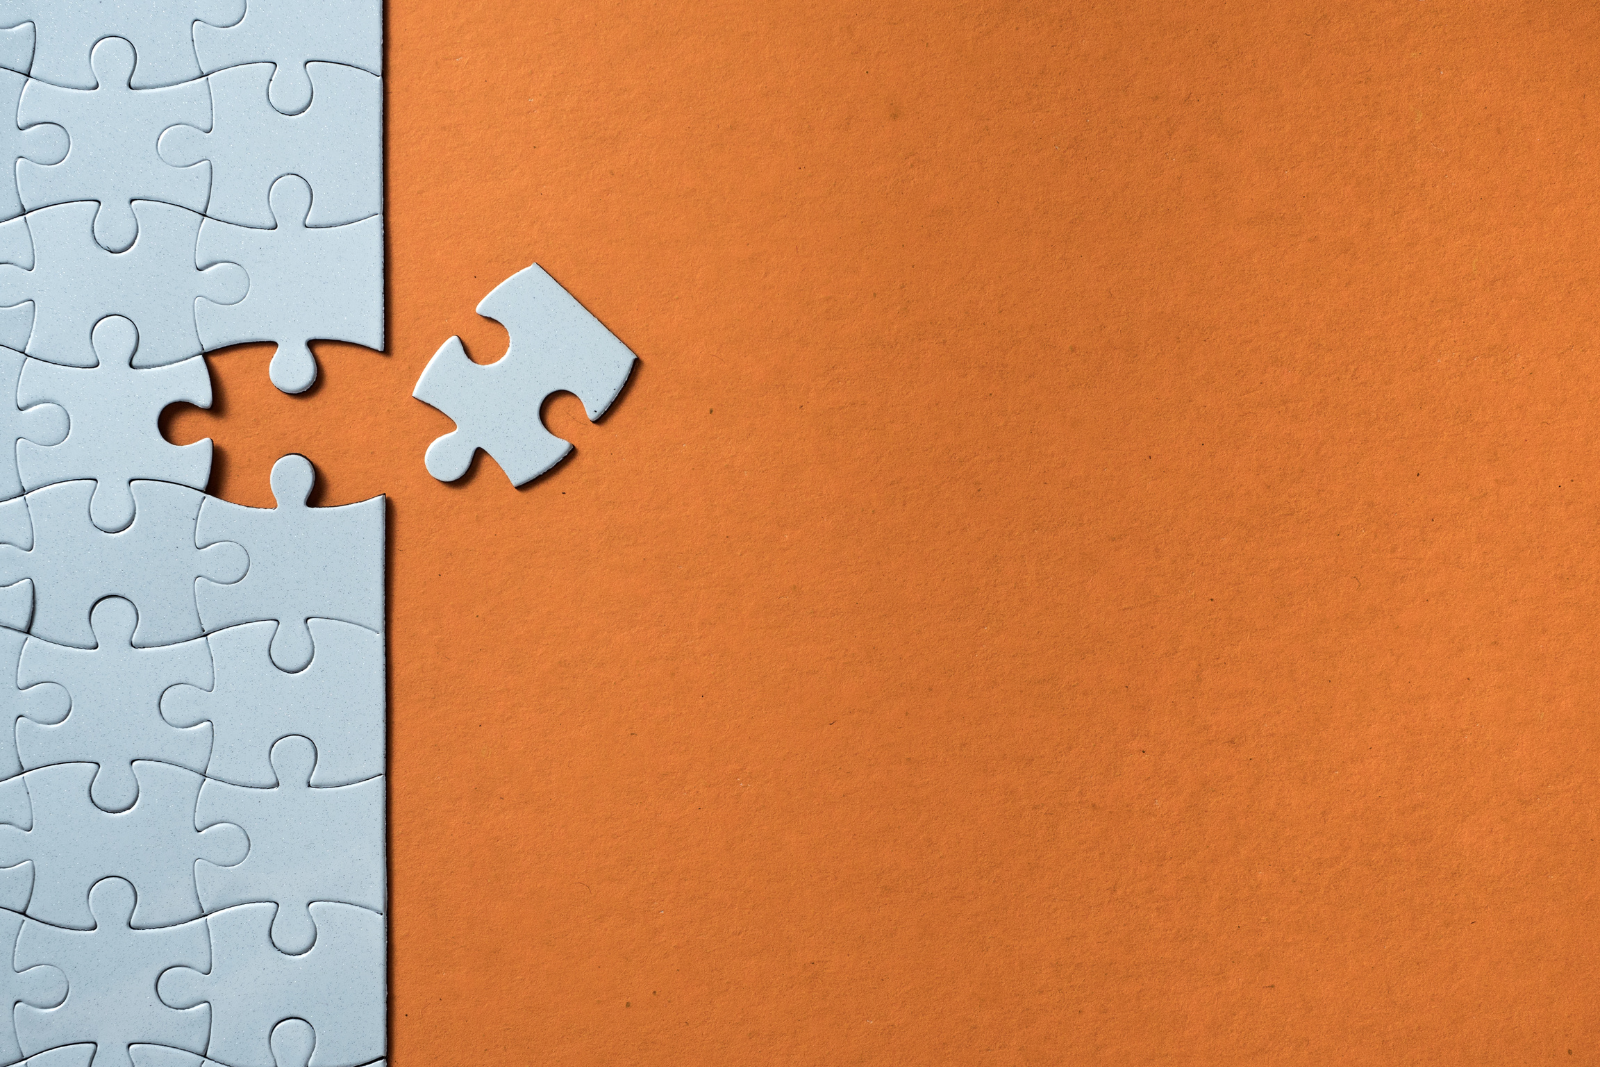 Image of a missing puzzle piece with an orange background